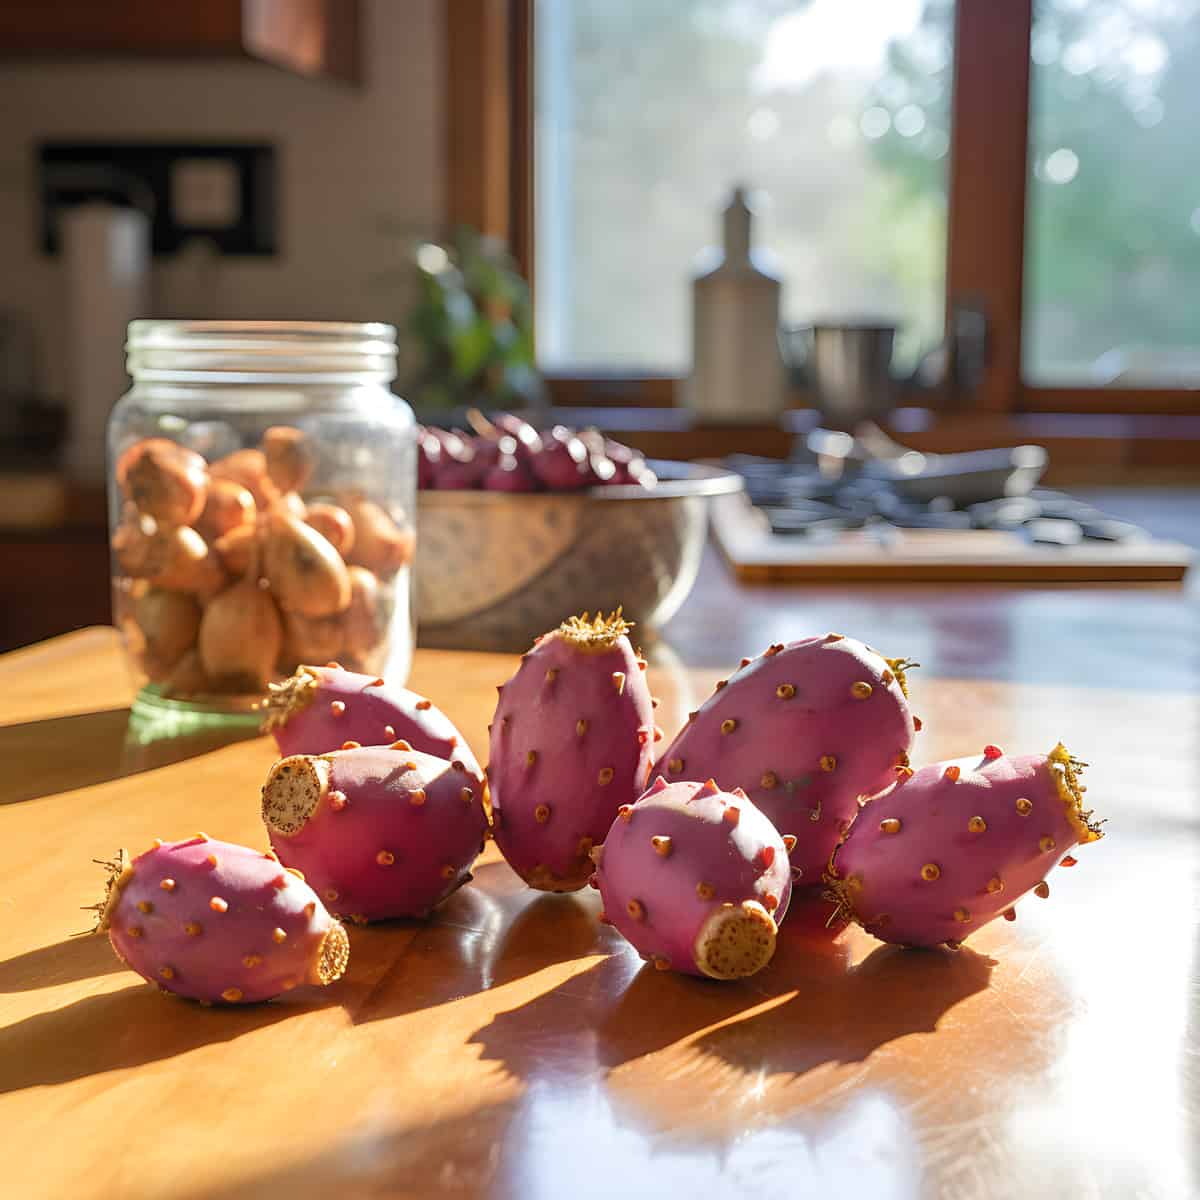 Prickly Pear Fruit on a kitchen counter